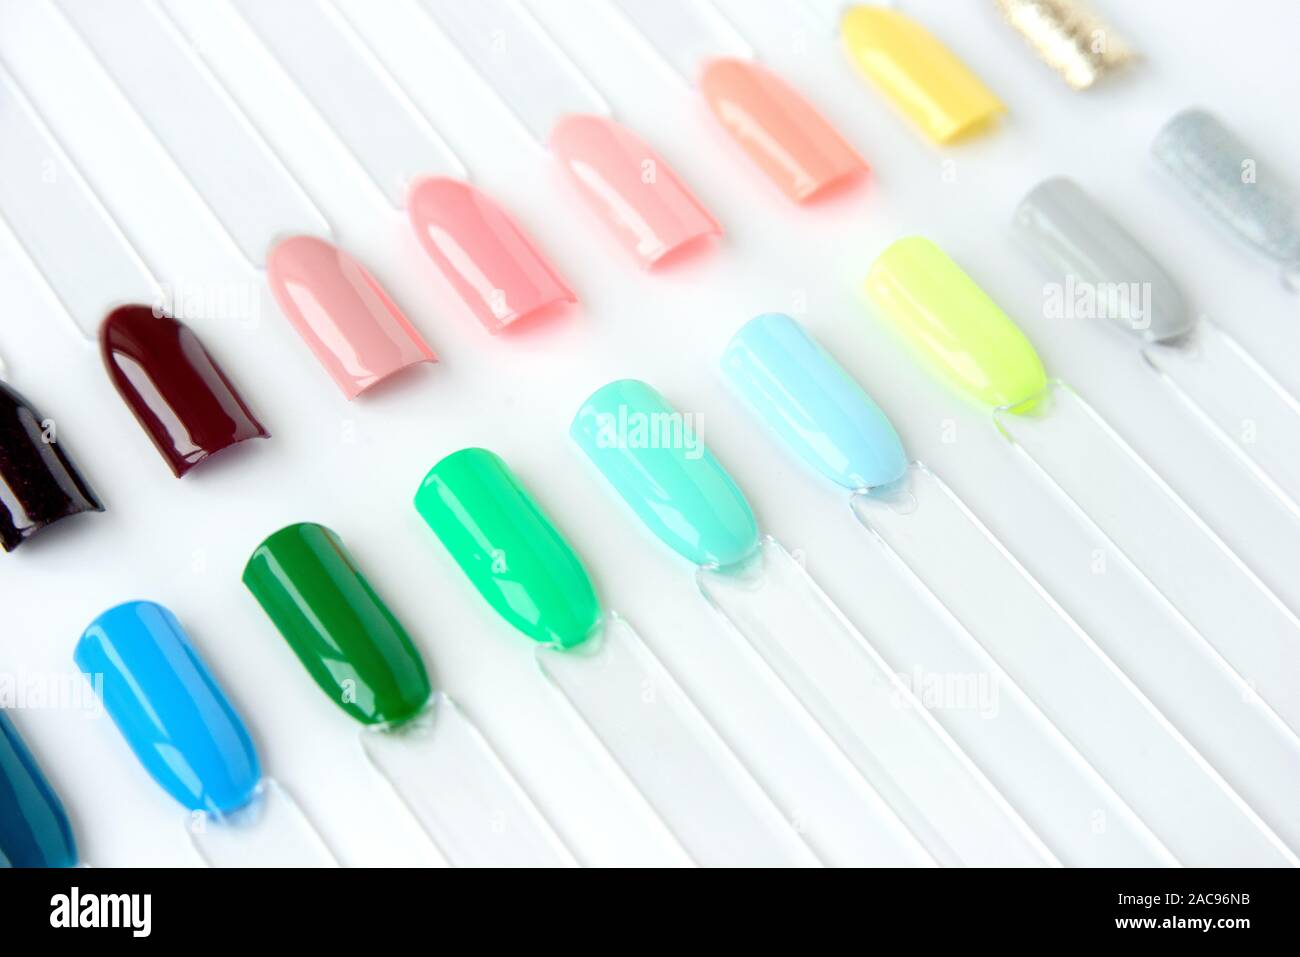 Nail polish samples in different bright colors. Colorful nail lacquer manicure swatches. Top view of nail art samples palette. Stock Photo